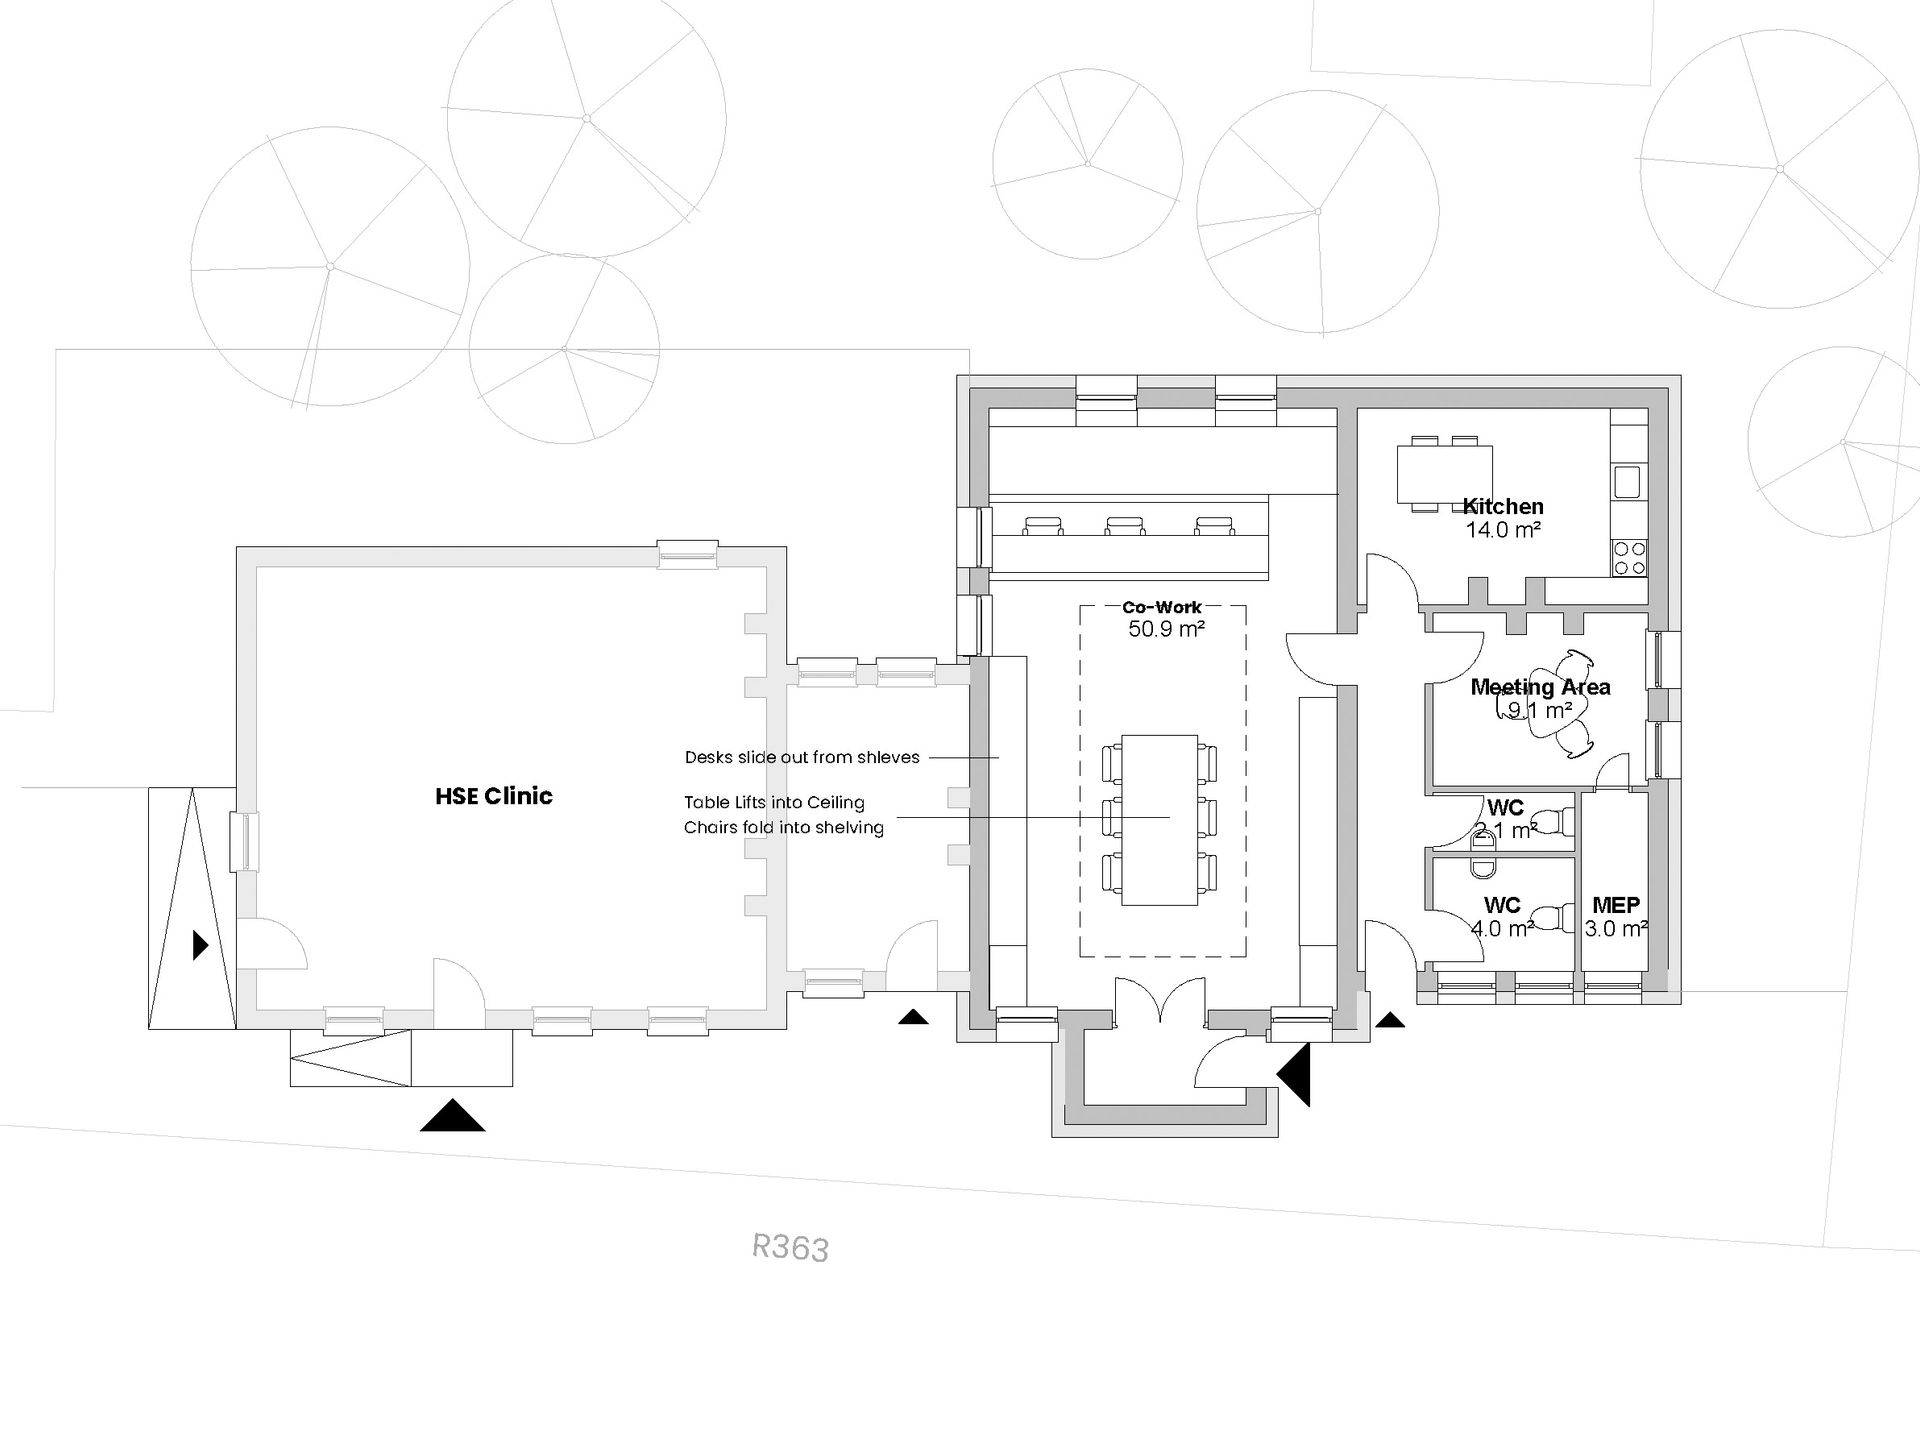 This proposed layout aims to provide sufficient space for dining, meetings and toilet facilities. The configuration shown in the remote working arrangement.